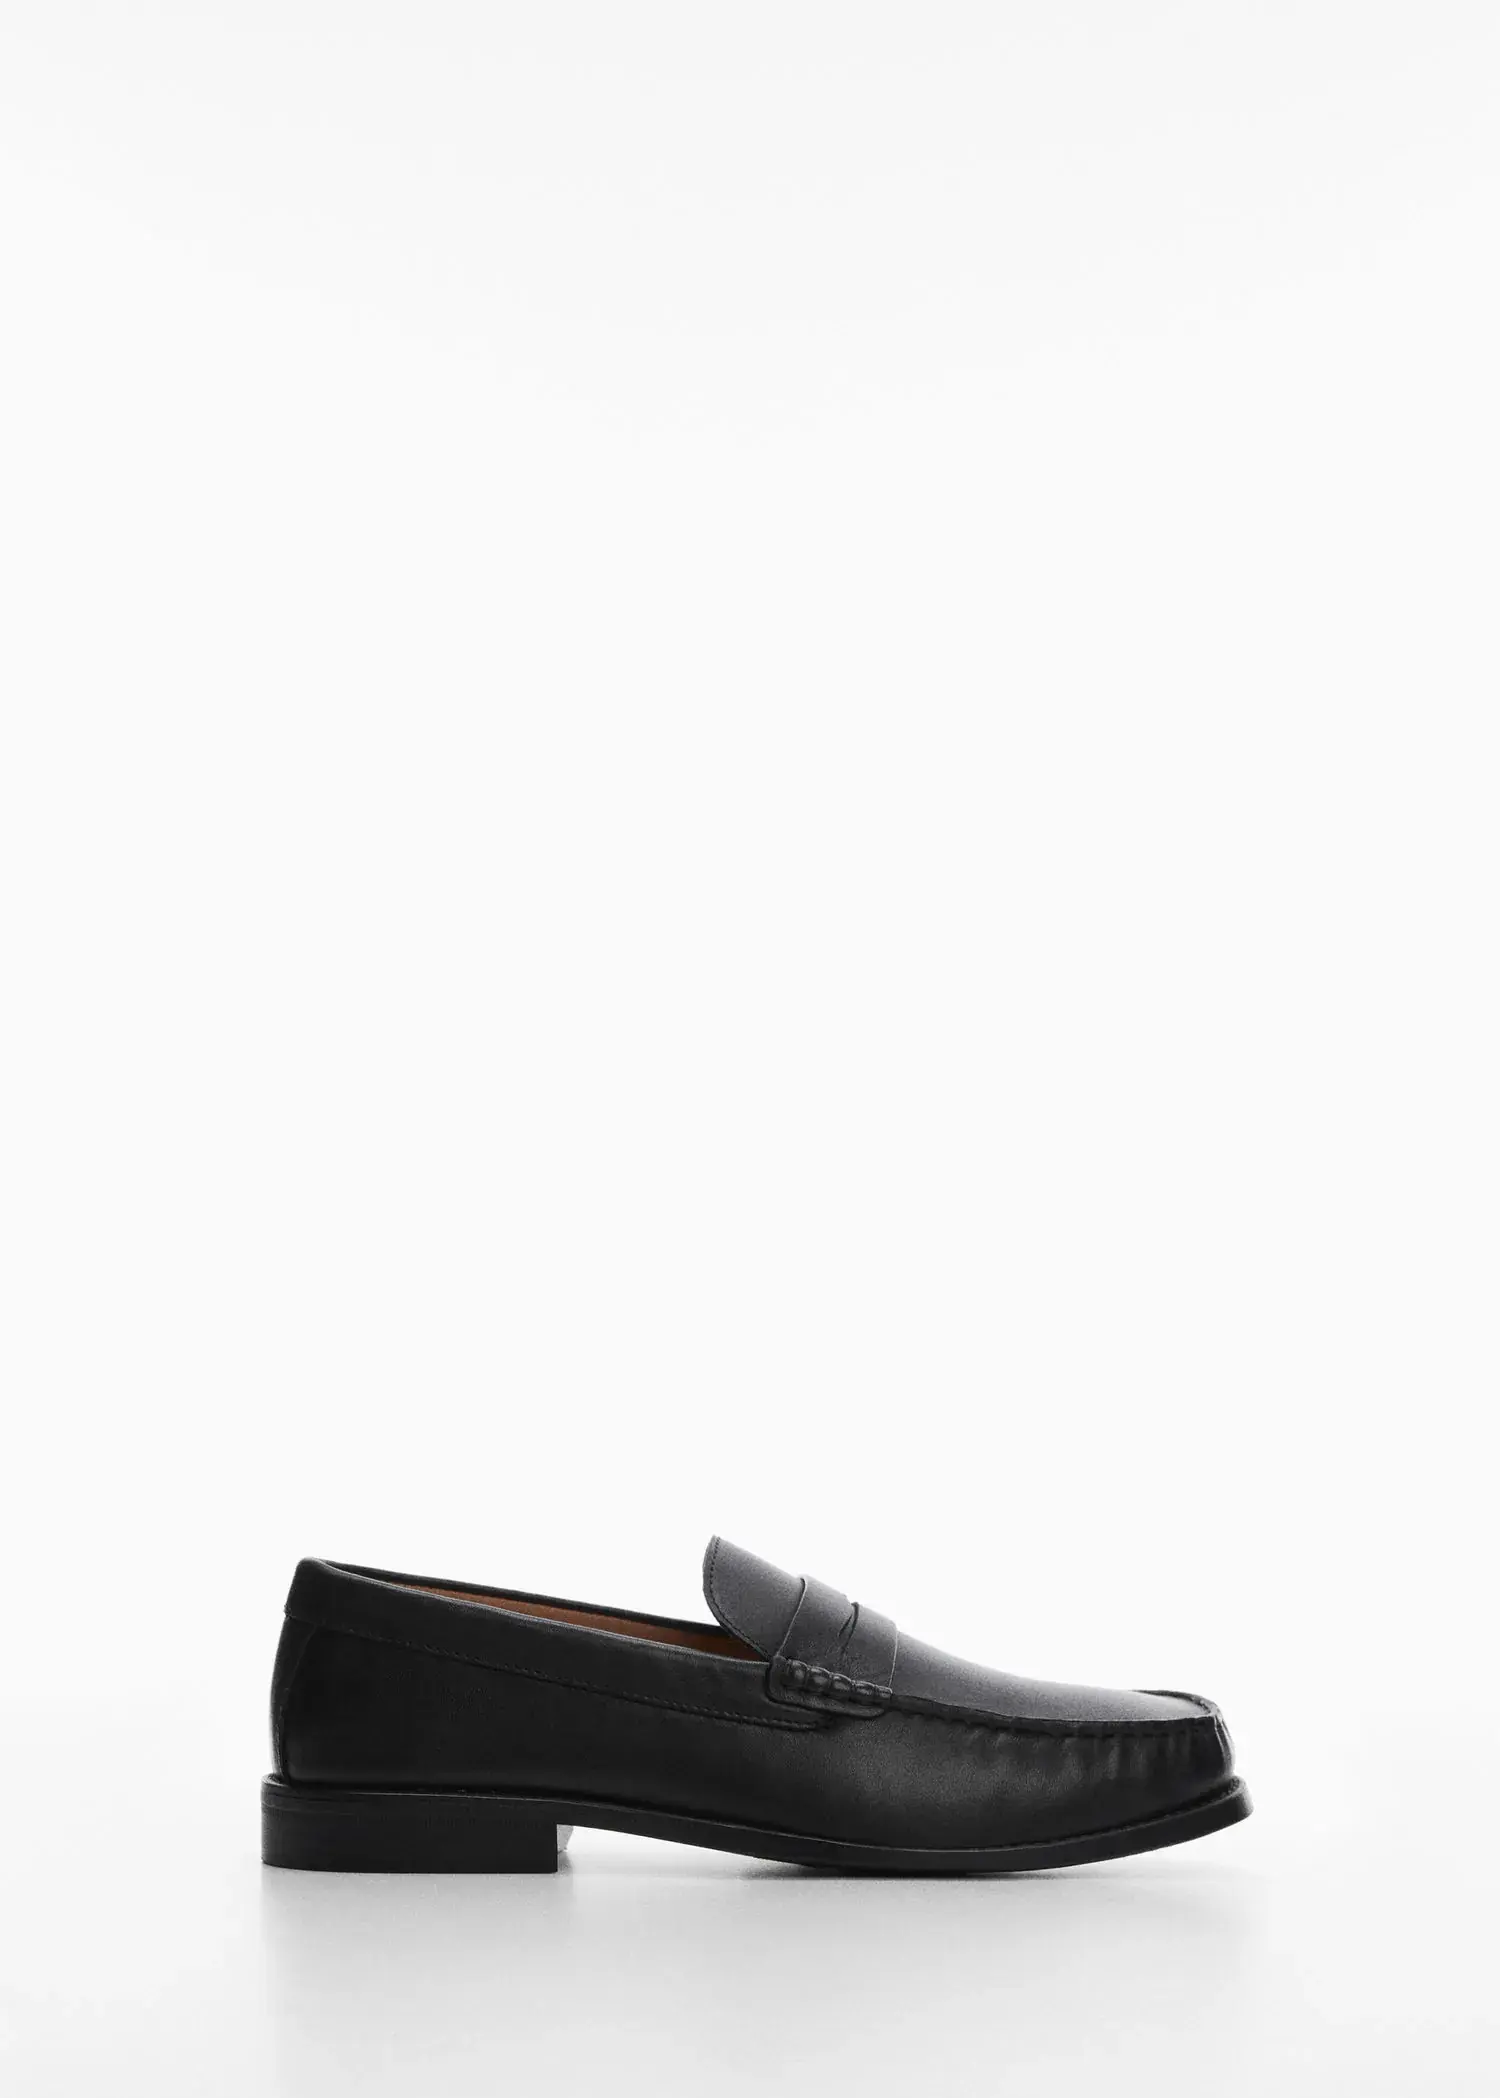 Mango Leather penny loafers. a black loafer is shown against a white background. 